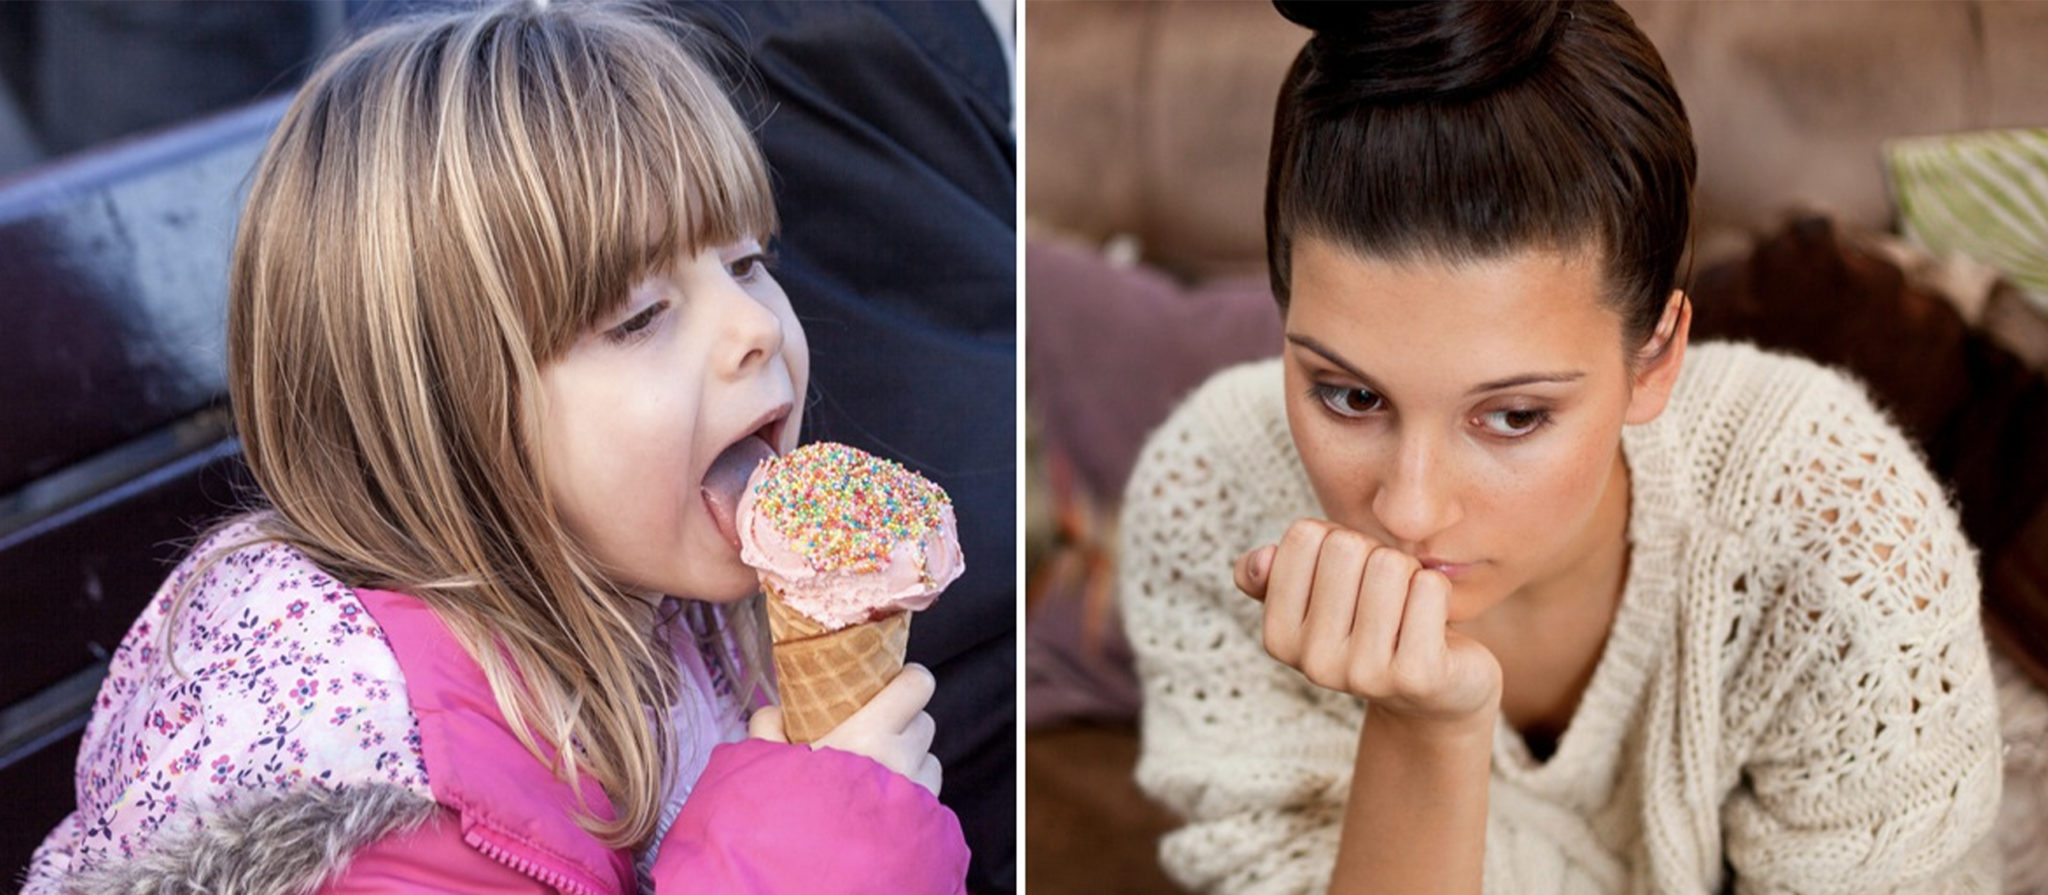 Devious Parents & Kids Reveal The Insanely Messed Up Secrets They’ve Been Hiding